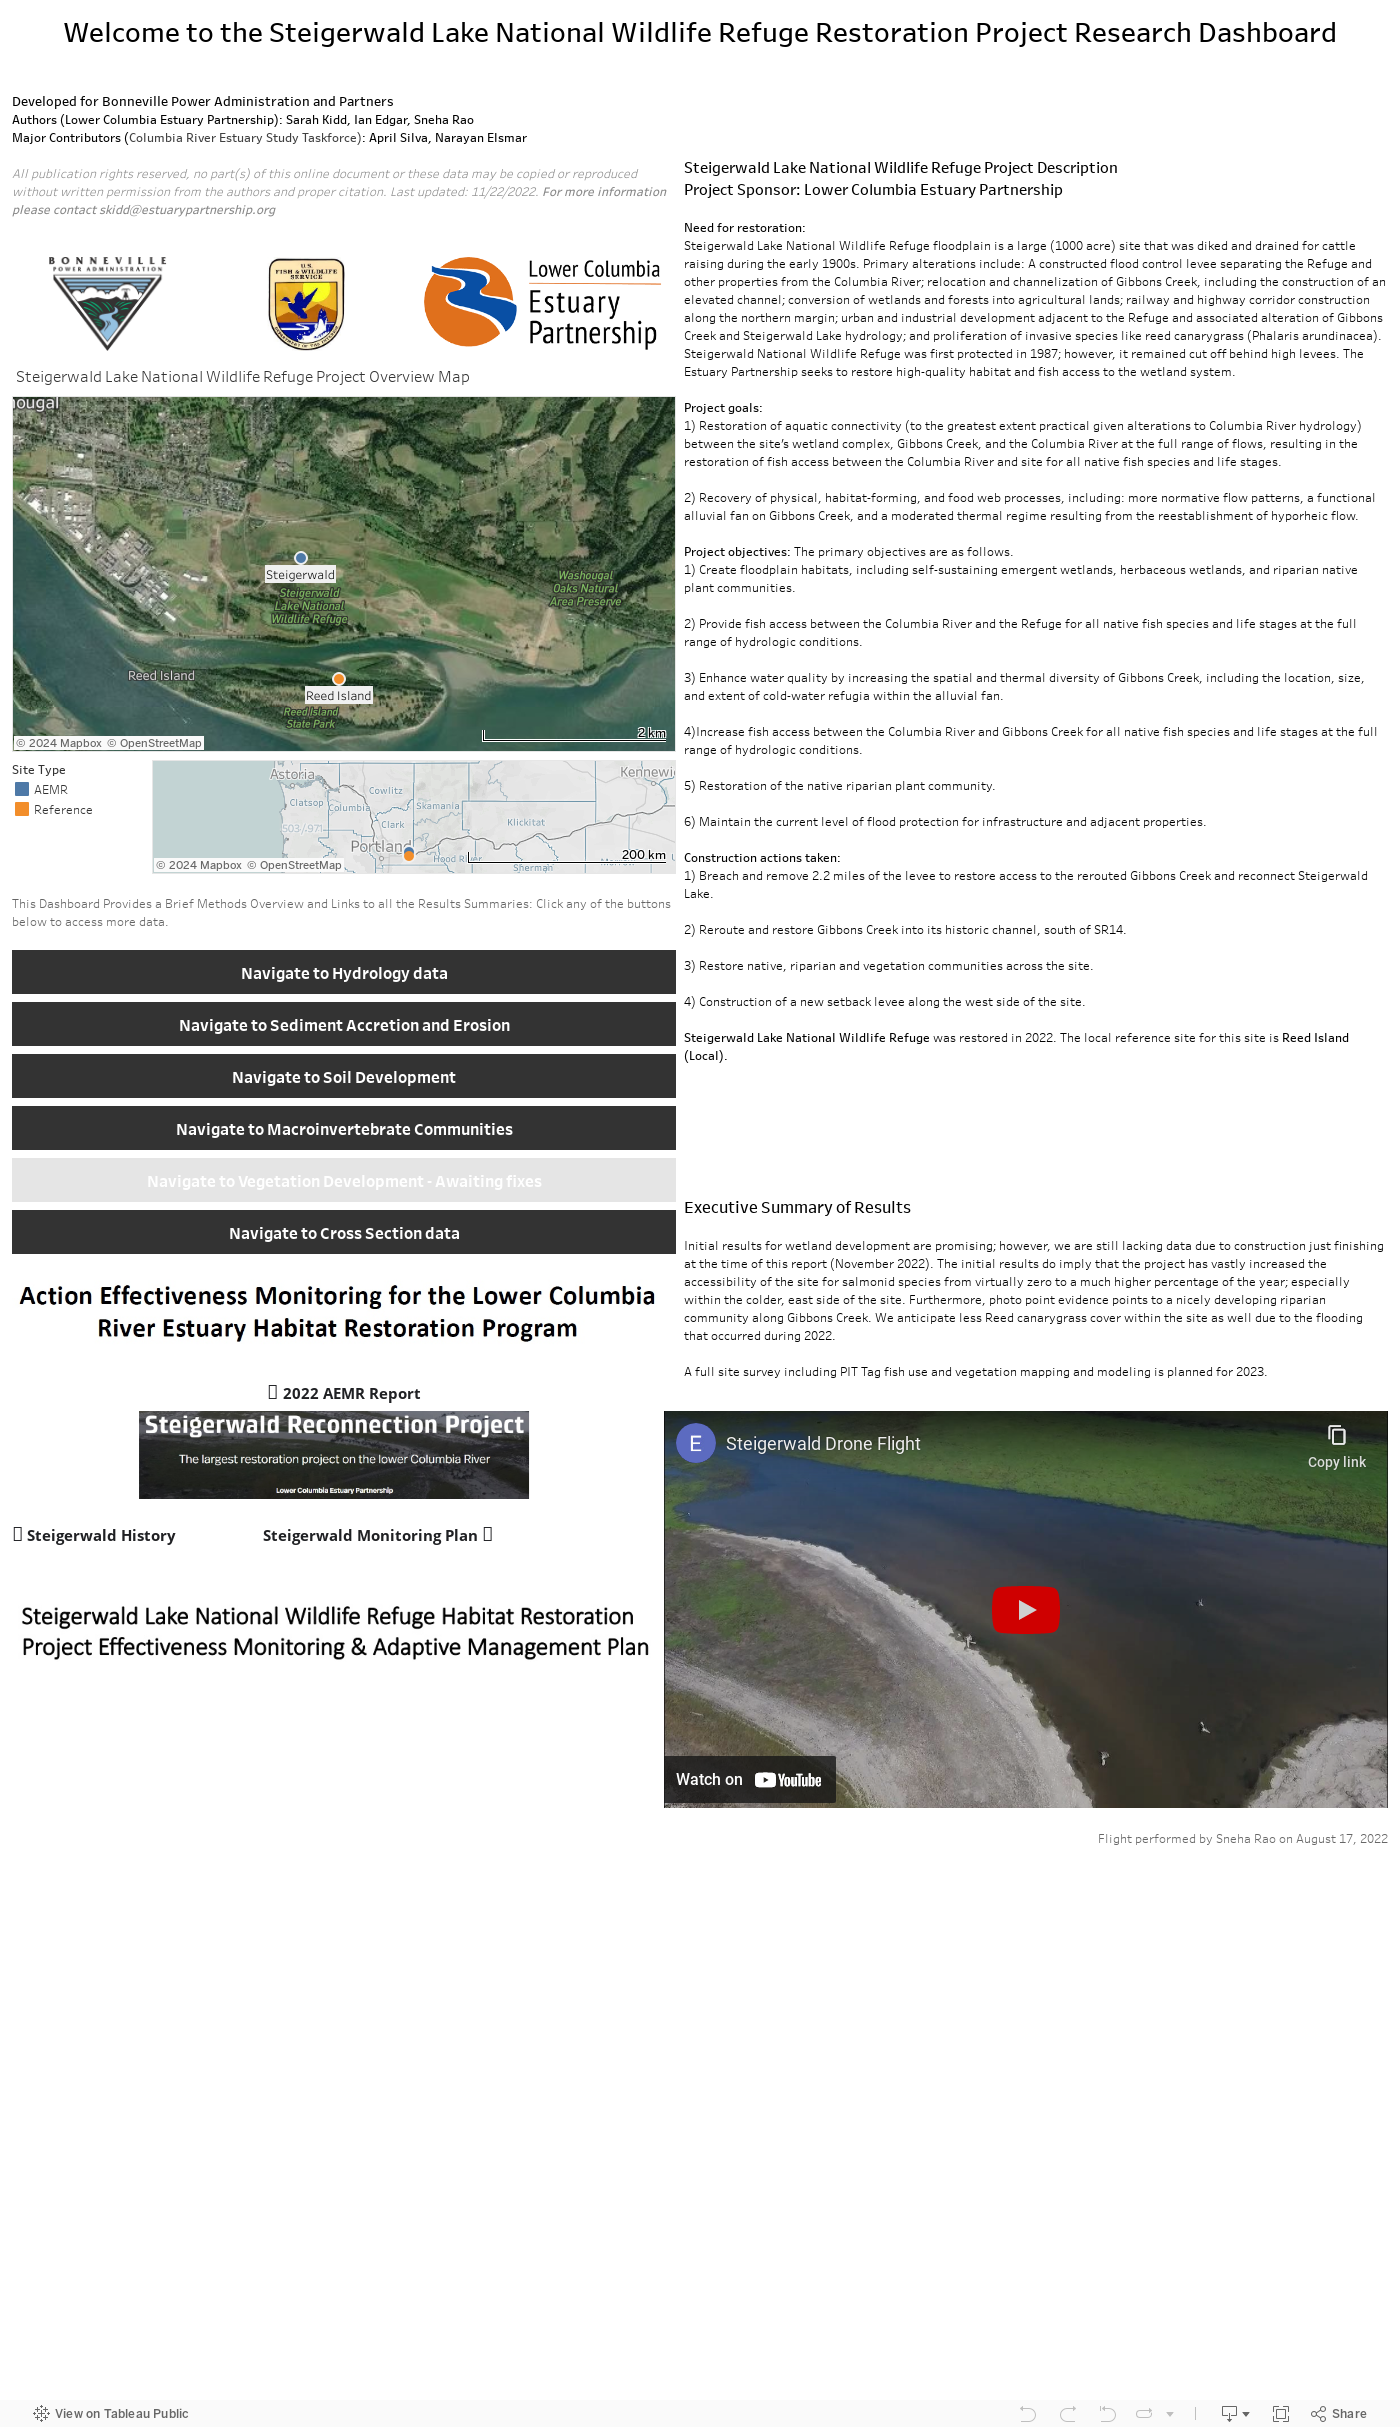 Welcome to the Steigerwald Lake National Wildlife Refuge Restoration Project Research Dashboard 